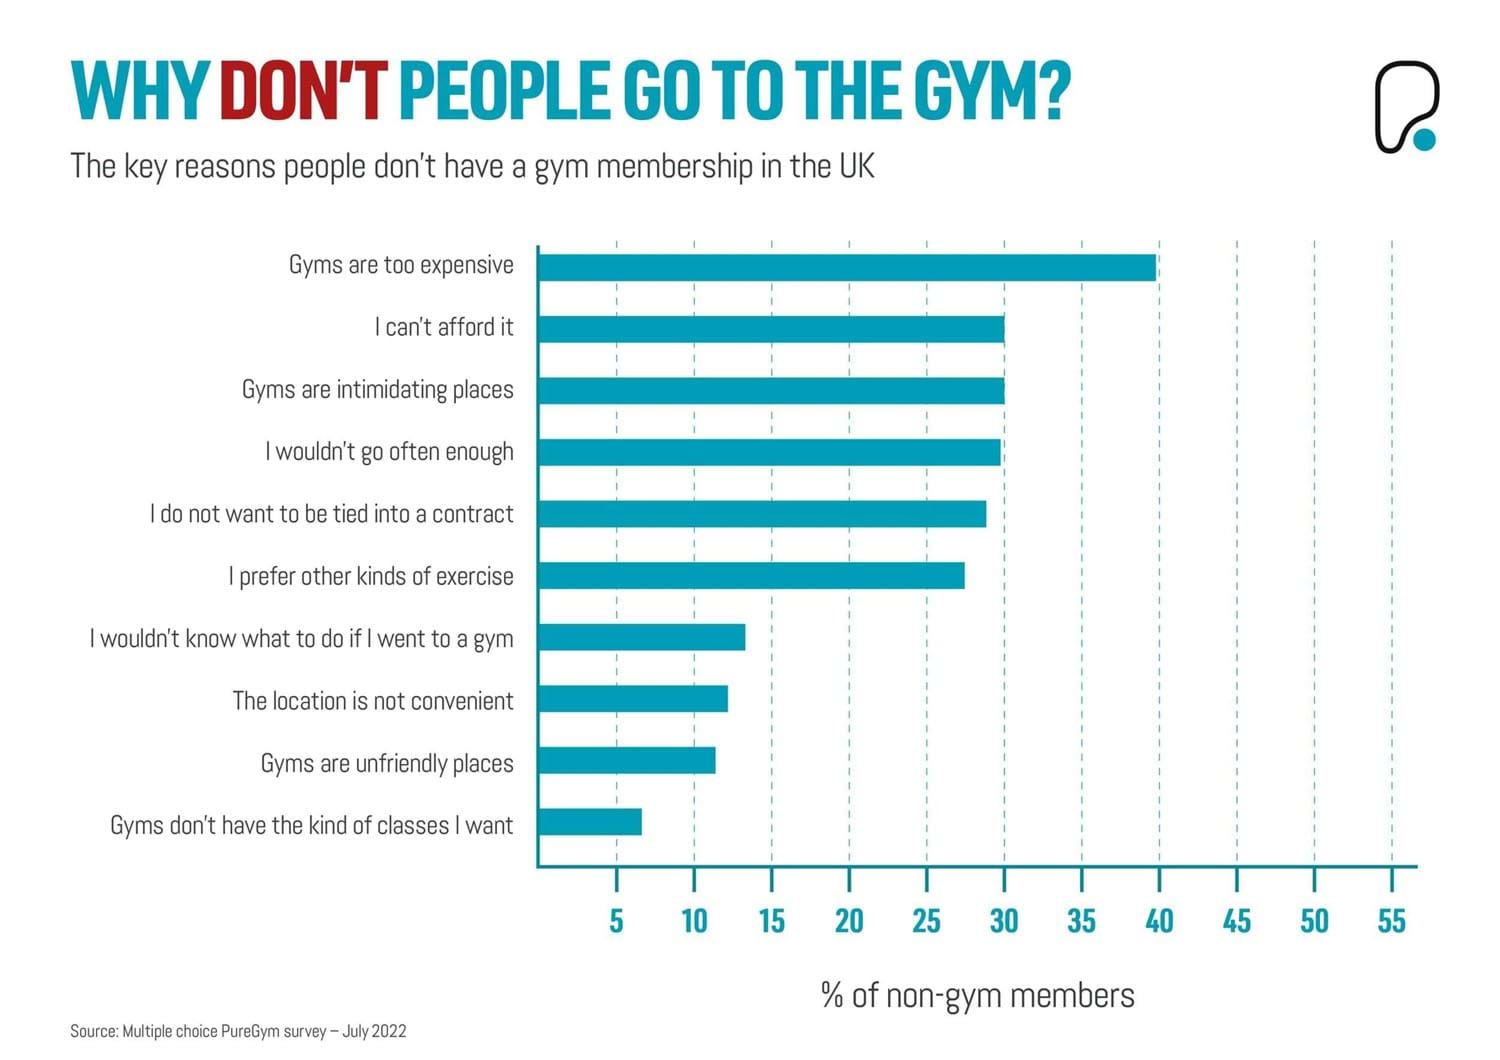 why don't people go to the gym?